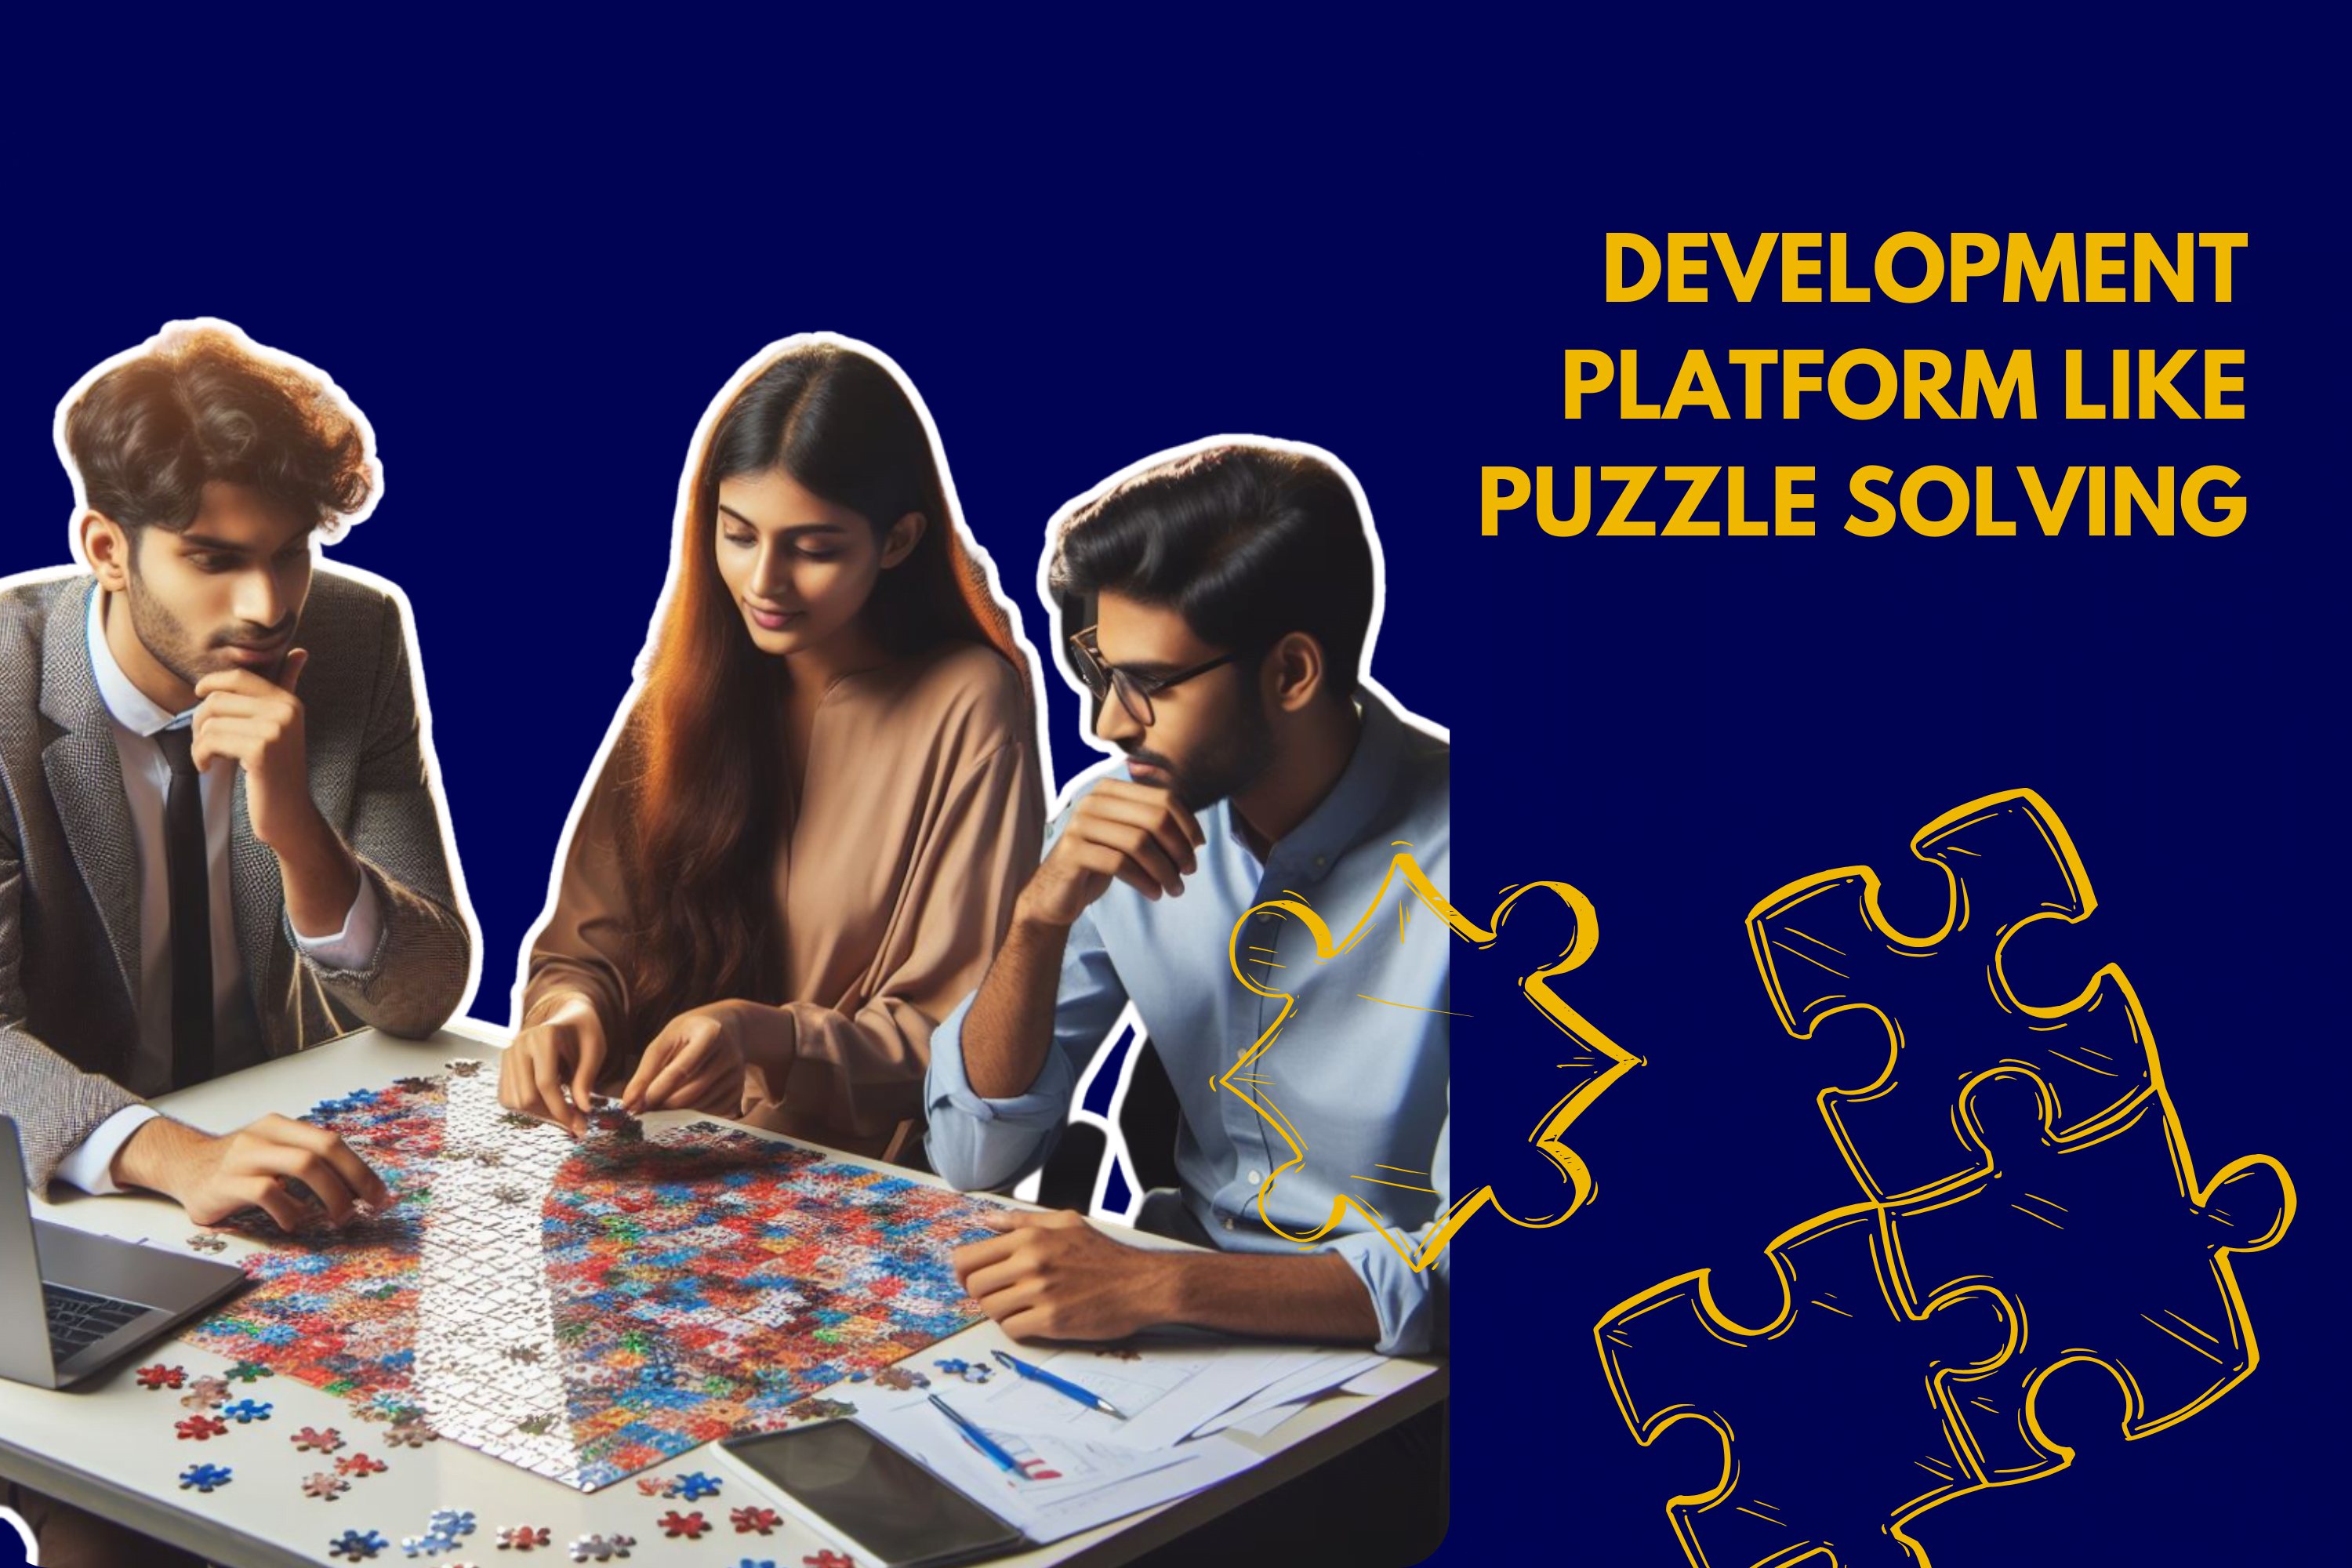 Developers playing puzzle which is now very similar to any app development using No code development platform or low code development platform.